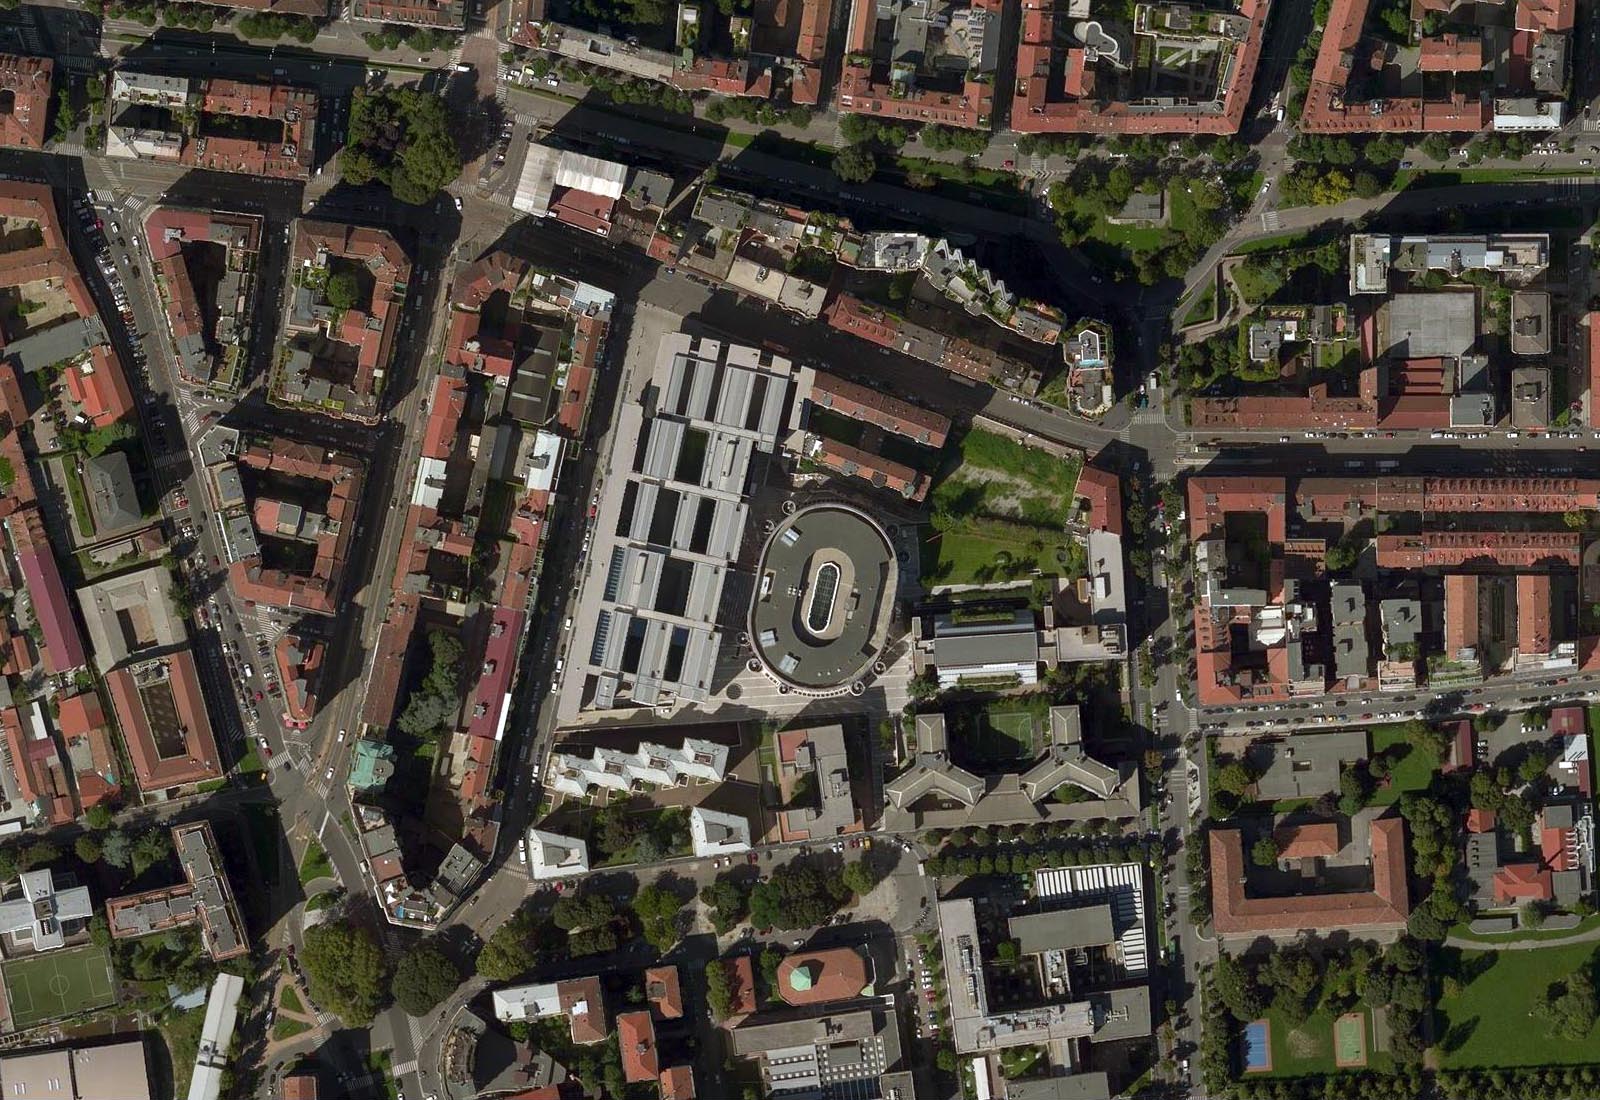 Bocconi university expansion impact - Zenithal aerial view of the Bocconi area